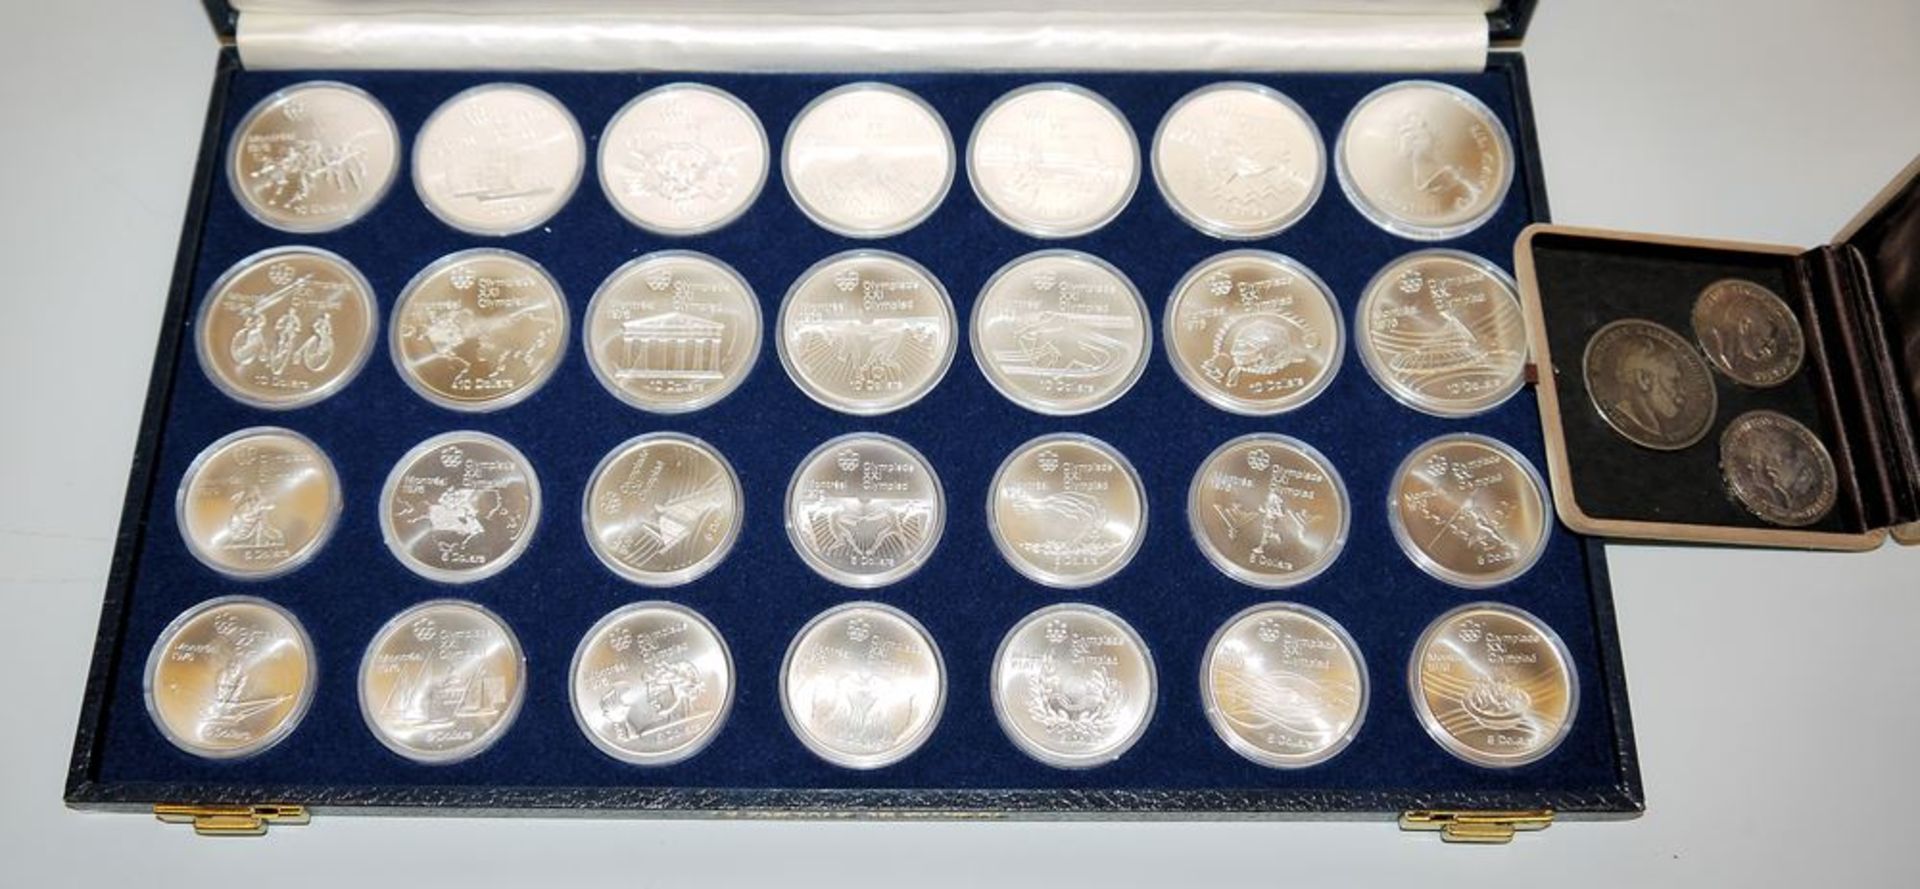 Full set of Canadian silver dollars for the Montreal Olympics 1976